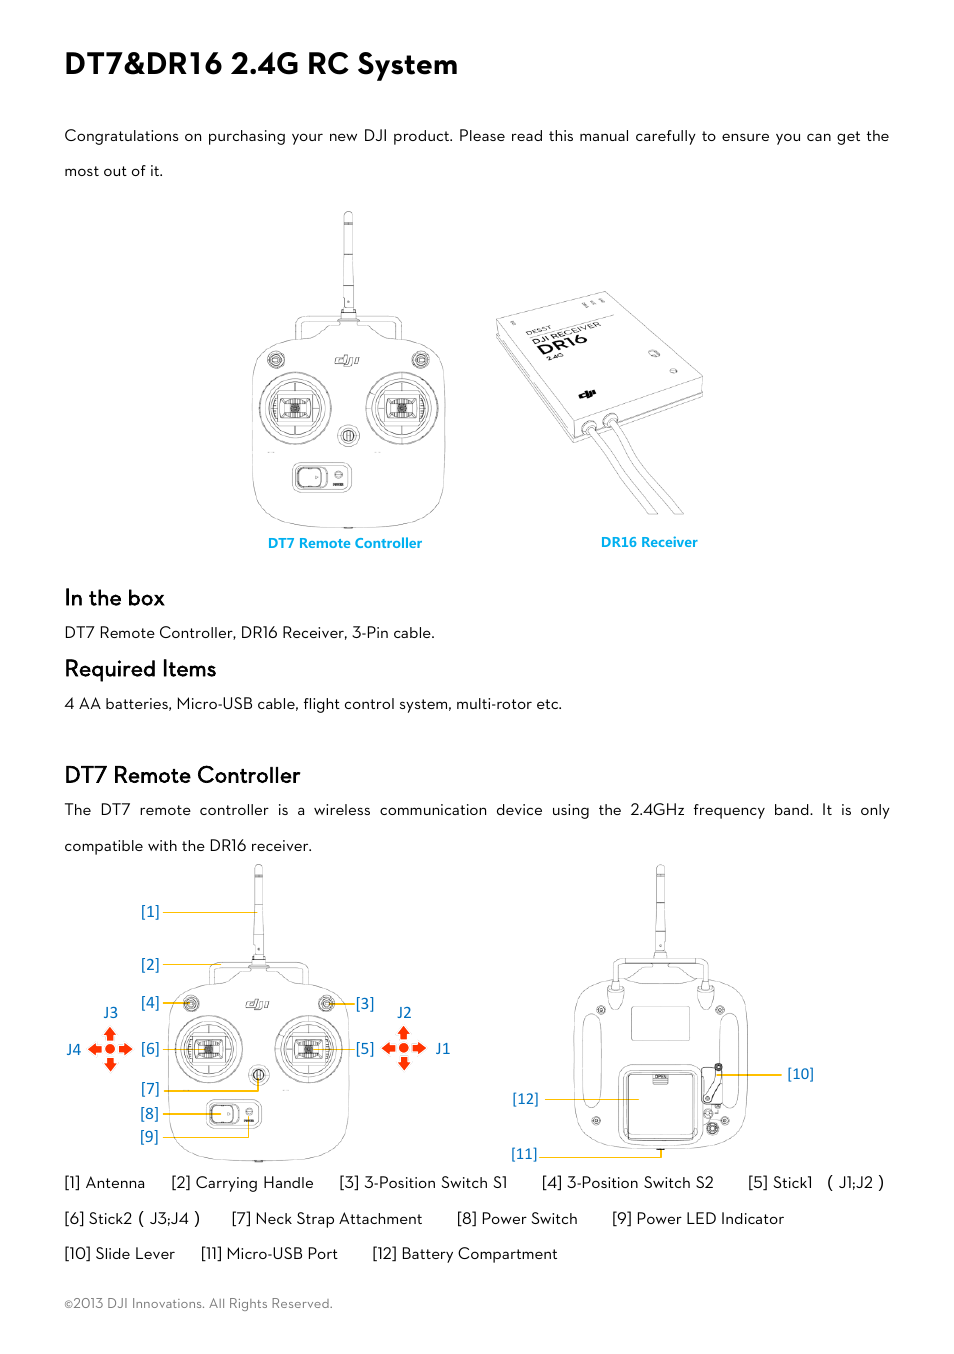 DJI DR16 User Manual | 4 pages | Also for: DT7